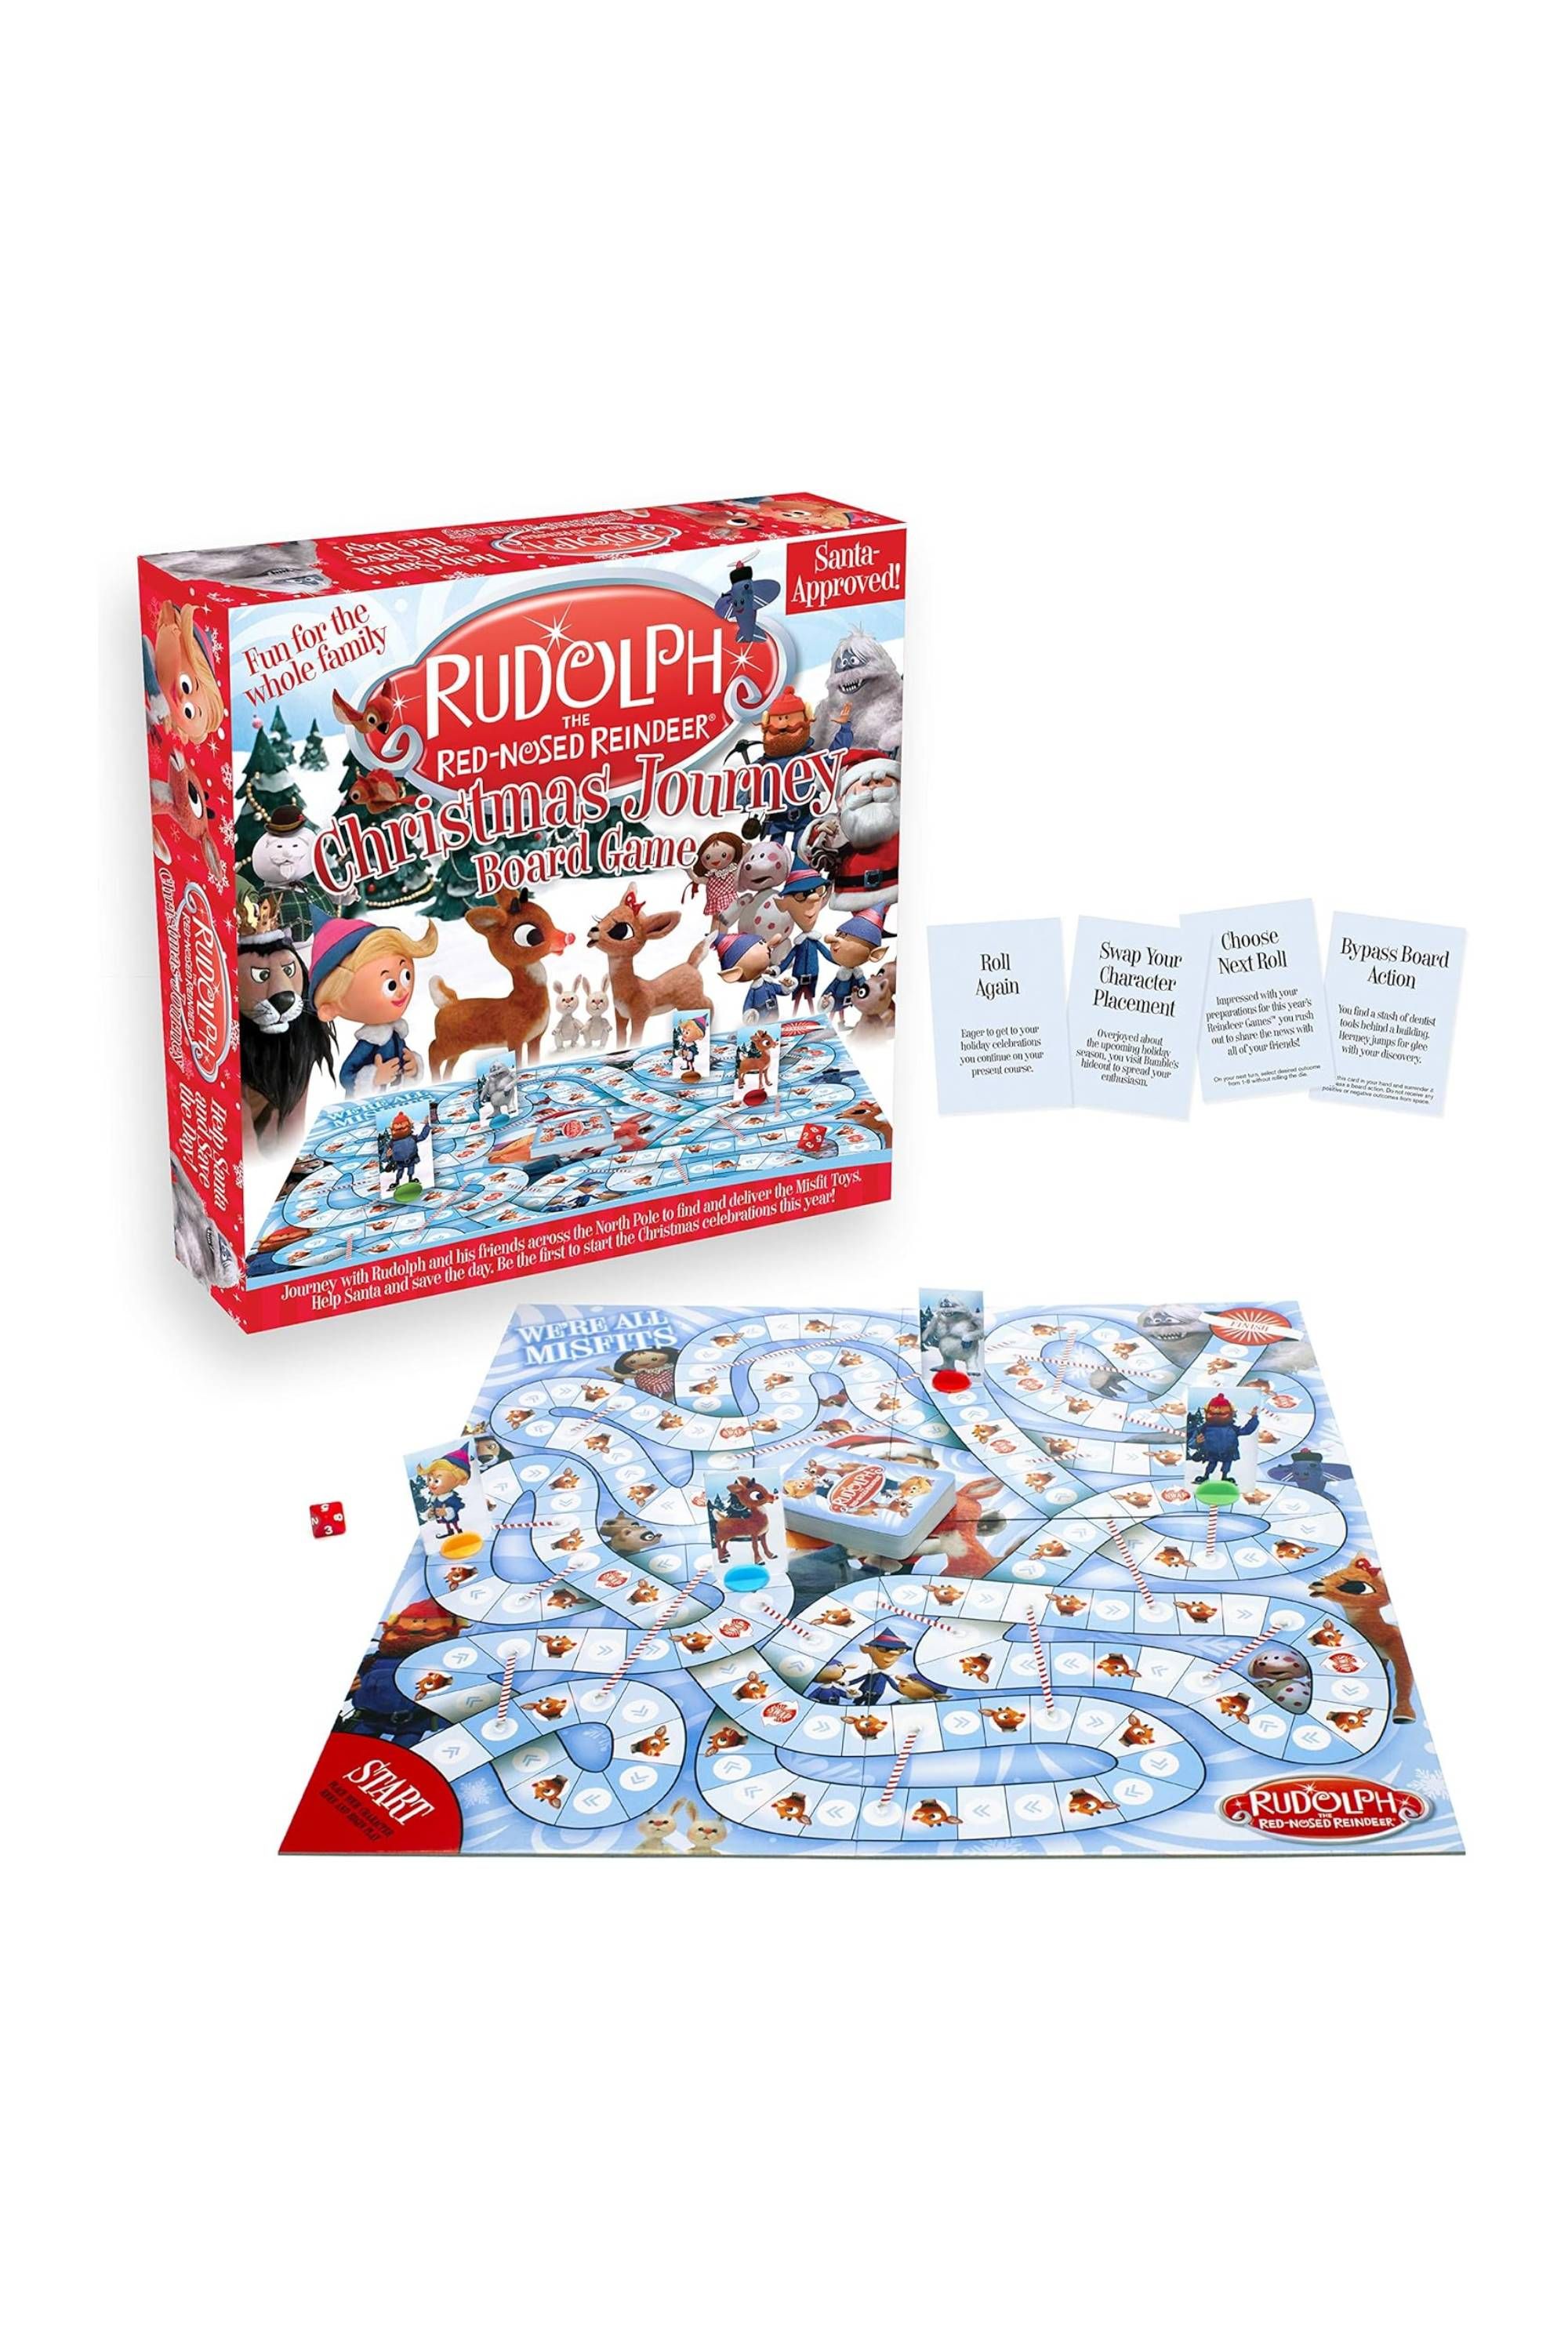 Aquarius Rudolph The Red-Nosed Reindeer Board Game